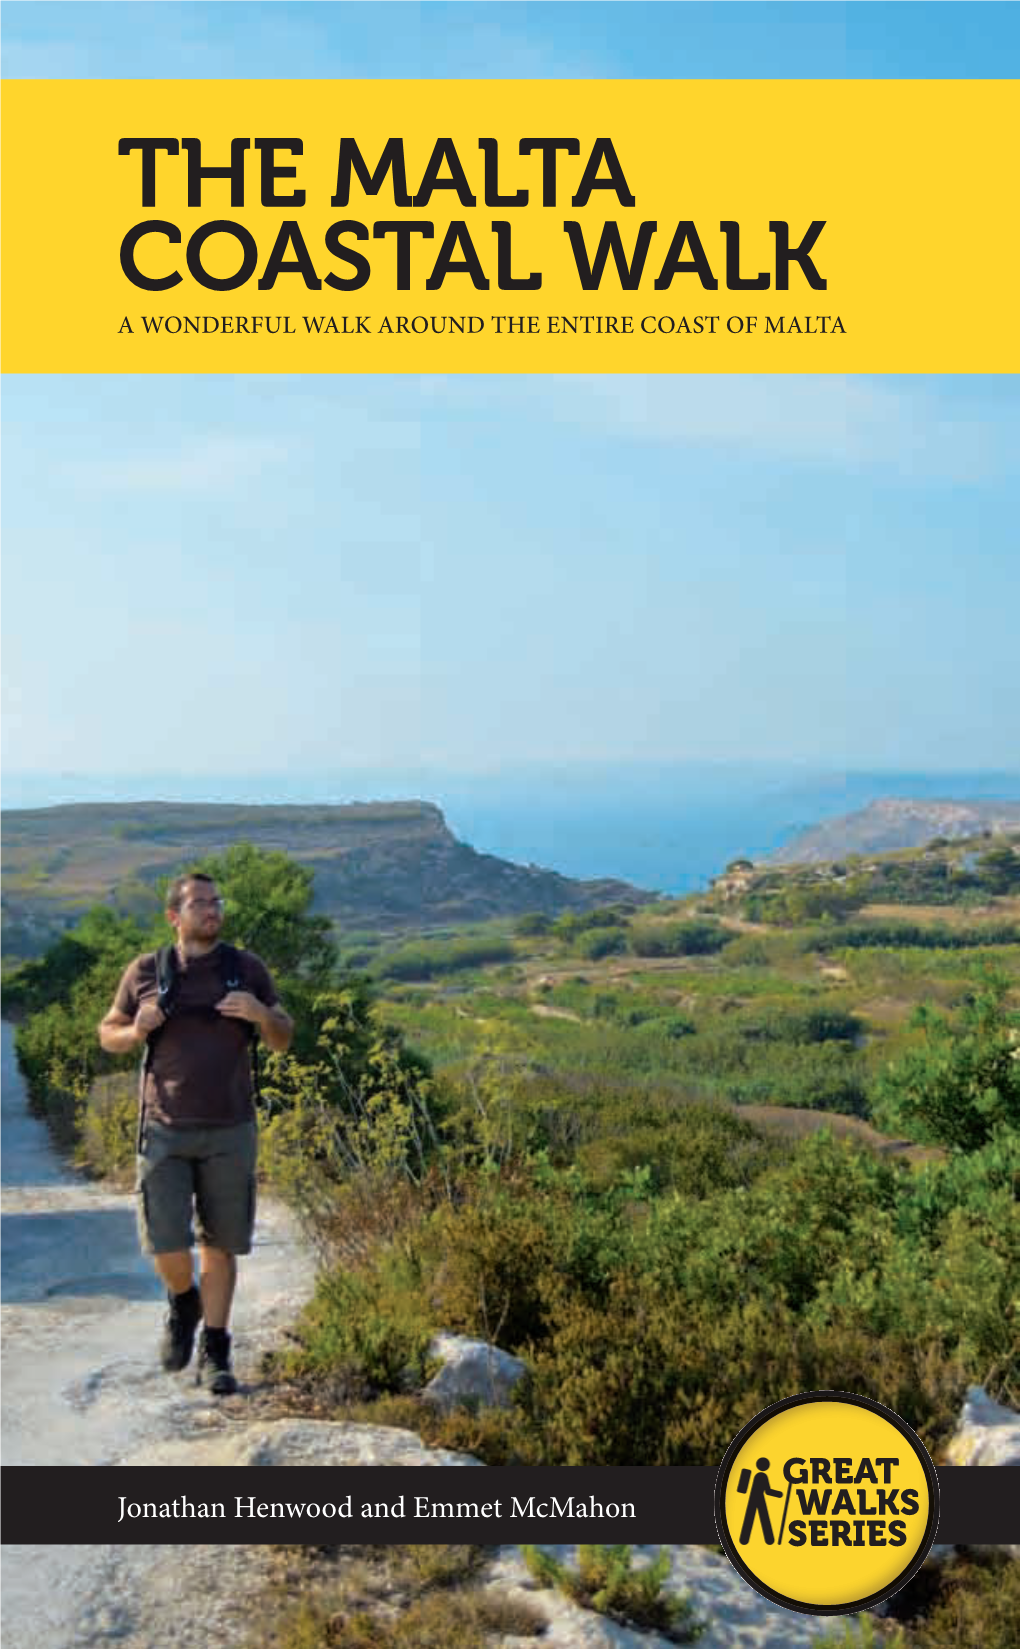 THE MALTA COASTAL WALK This 155 Km Walk Takes You Around the Entire Island by a Route That Is Interesting, Safe, Varied and Very Enjoyable